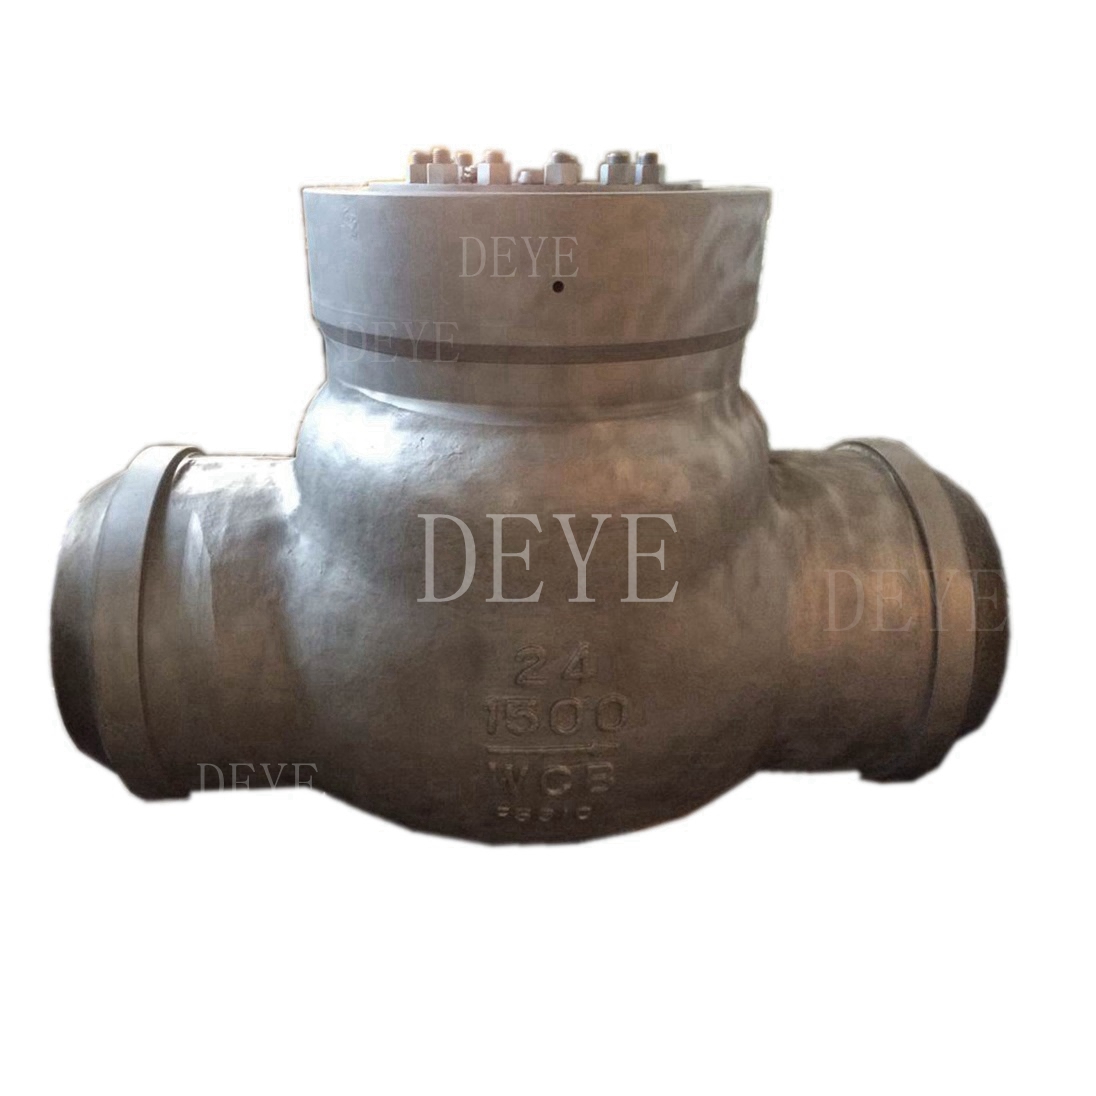 China New Product Forged Valve With Bsp -
 A216 high pressure 1500LBS WCB Check Valve CVC-001500 – Deye